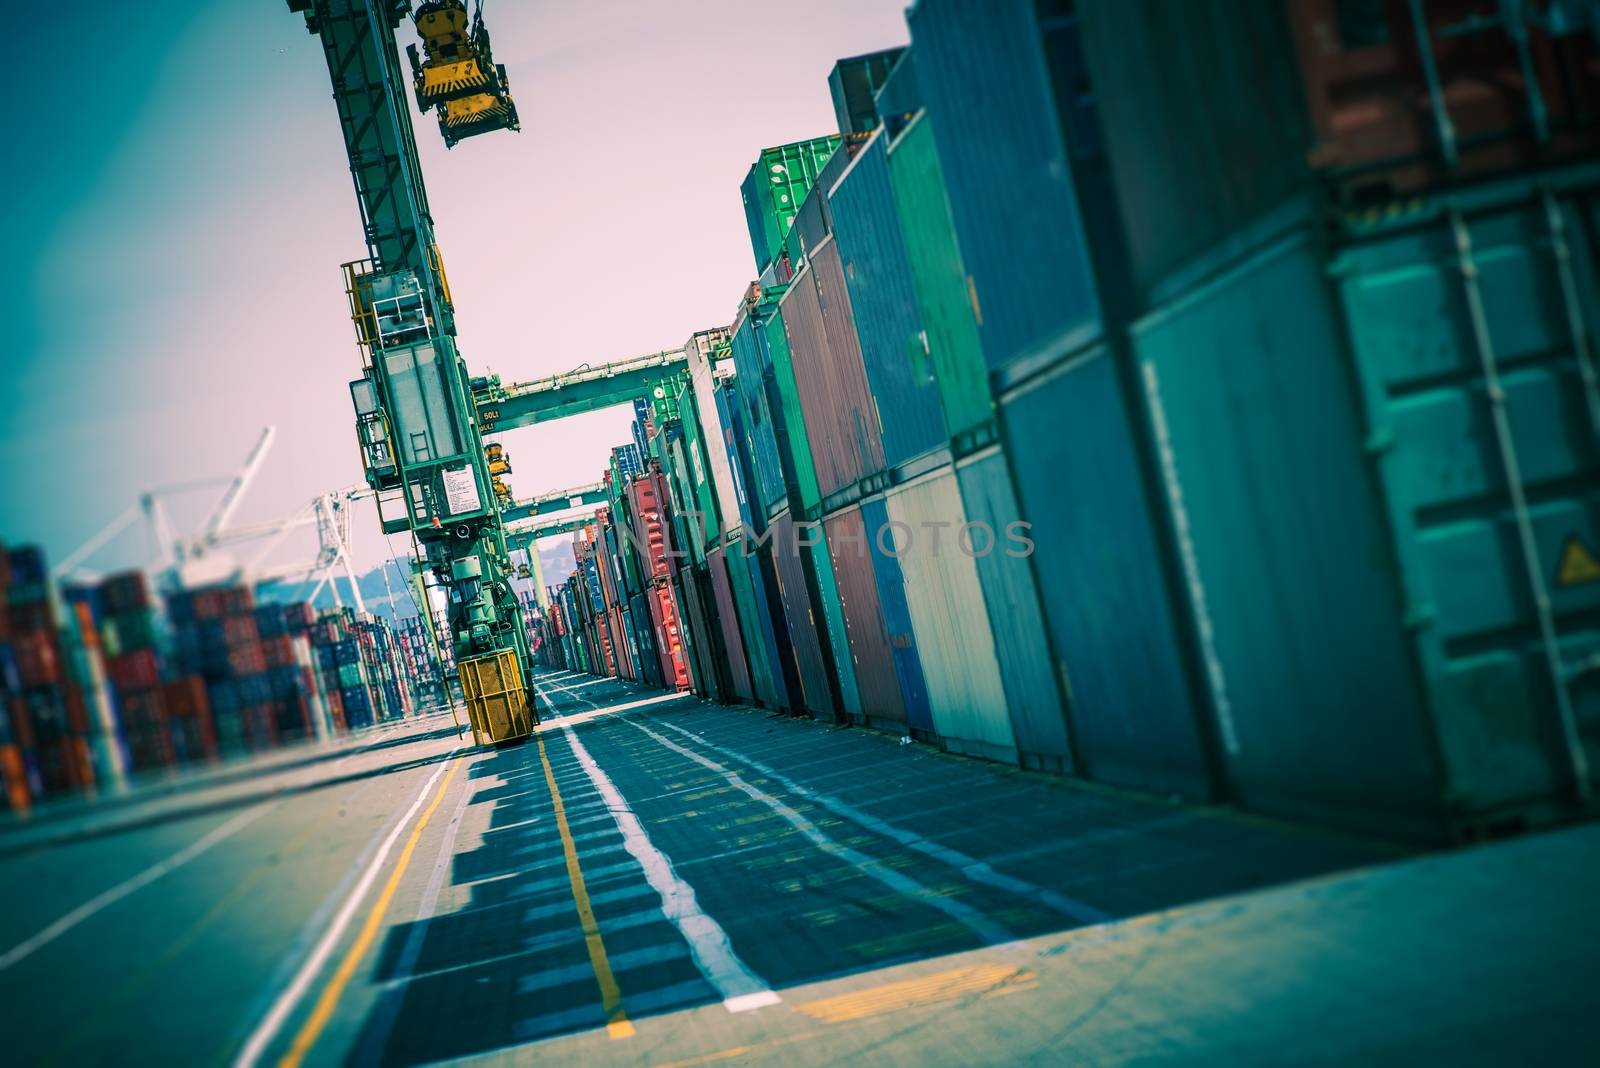 Cargo Containers Alley by welcomia